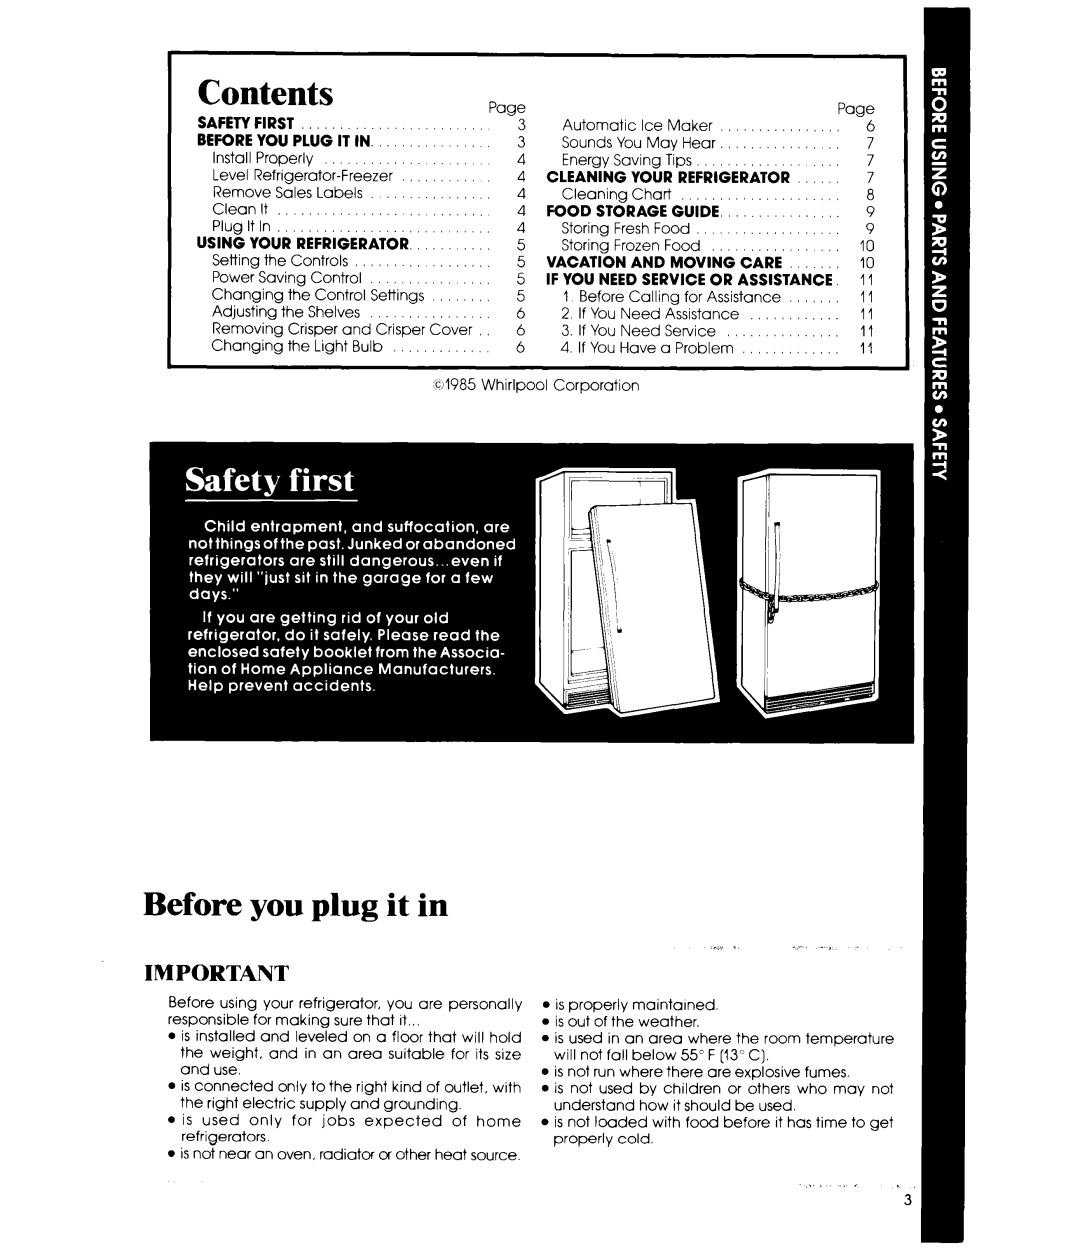 Whirlpool ETWM ws manual Contents, Before you plug it in 